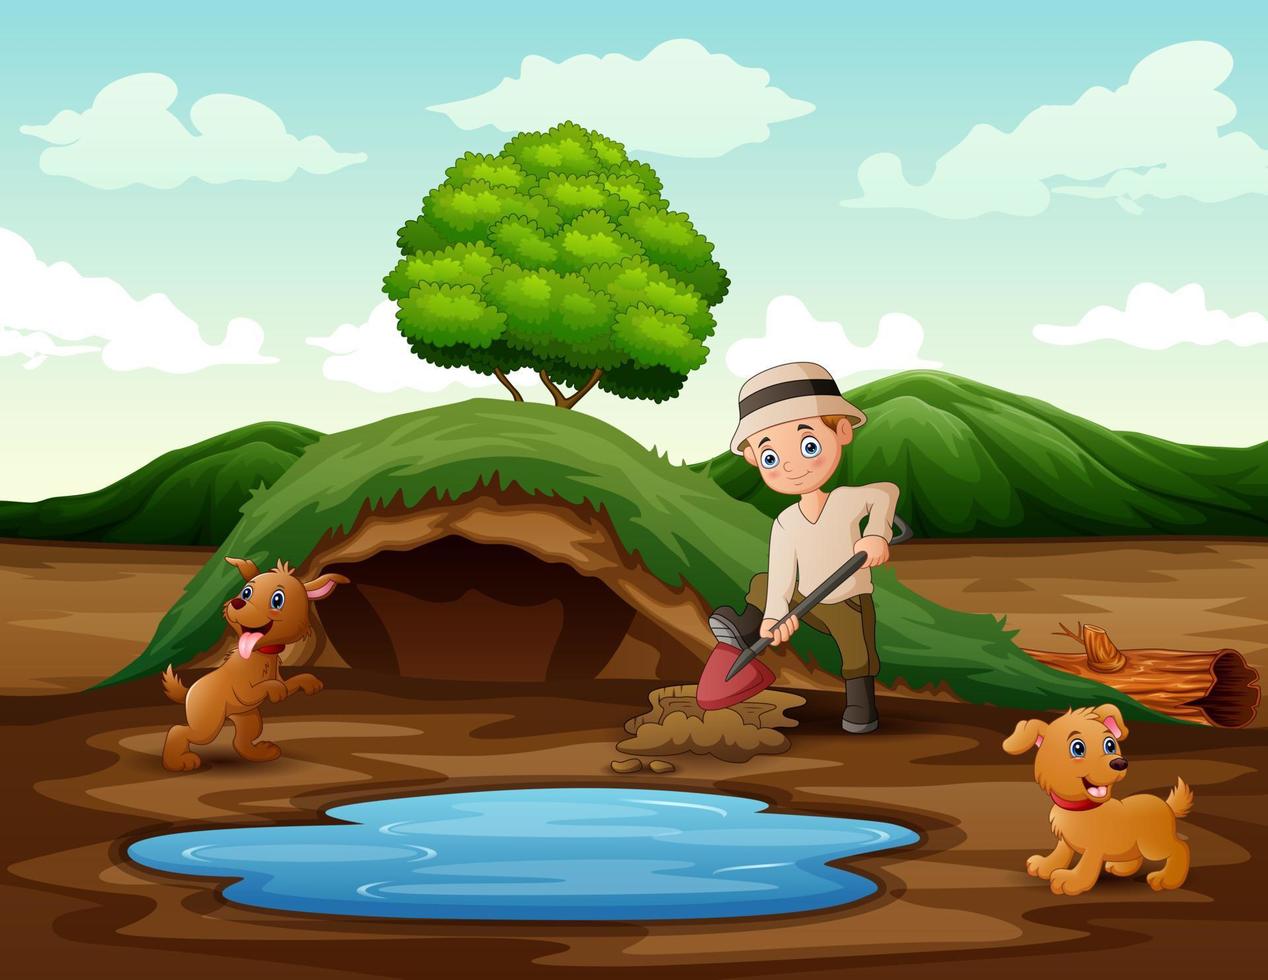 Man digging soil with a shovel near a small pond vector